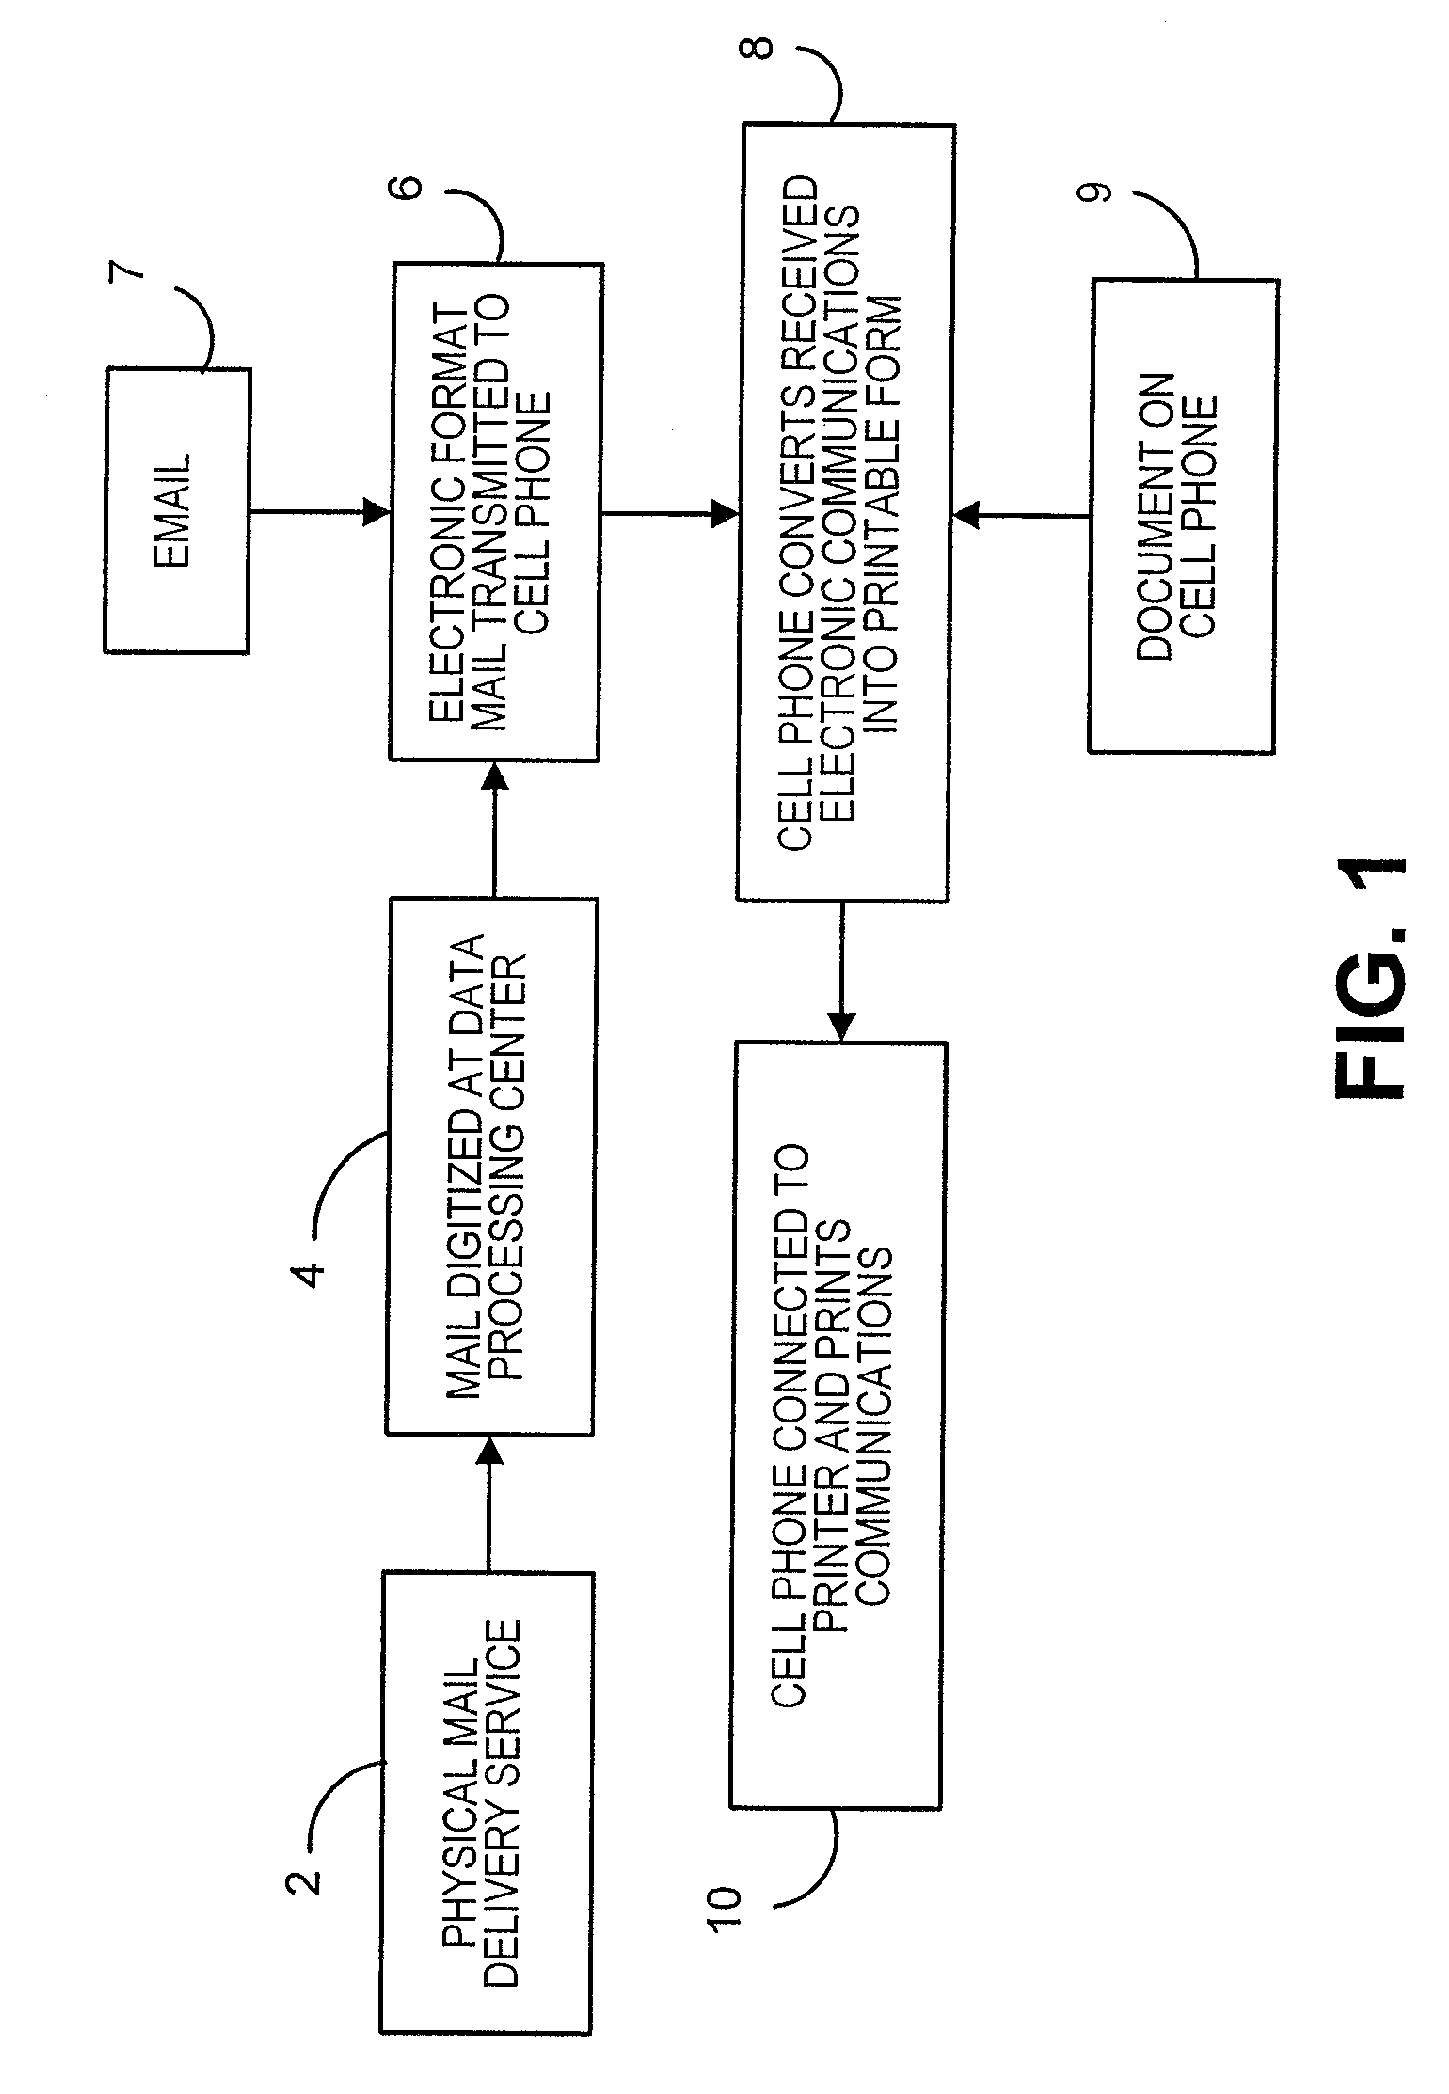 Method and system for producing hard copies of electronic information employing a portable personal receiving device